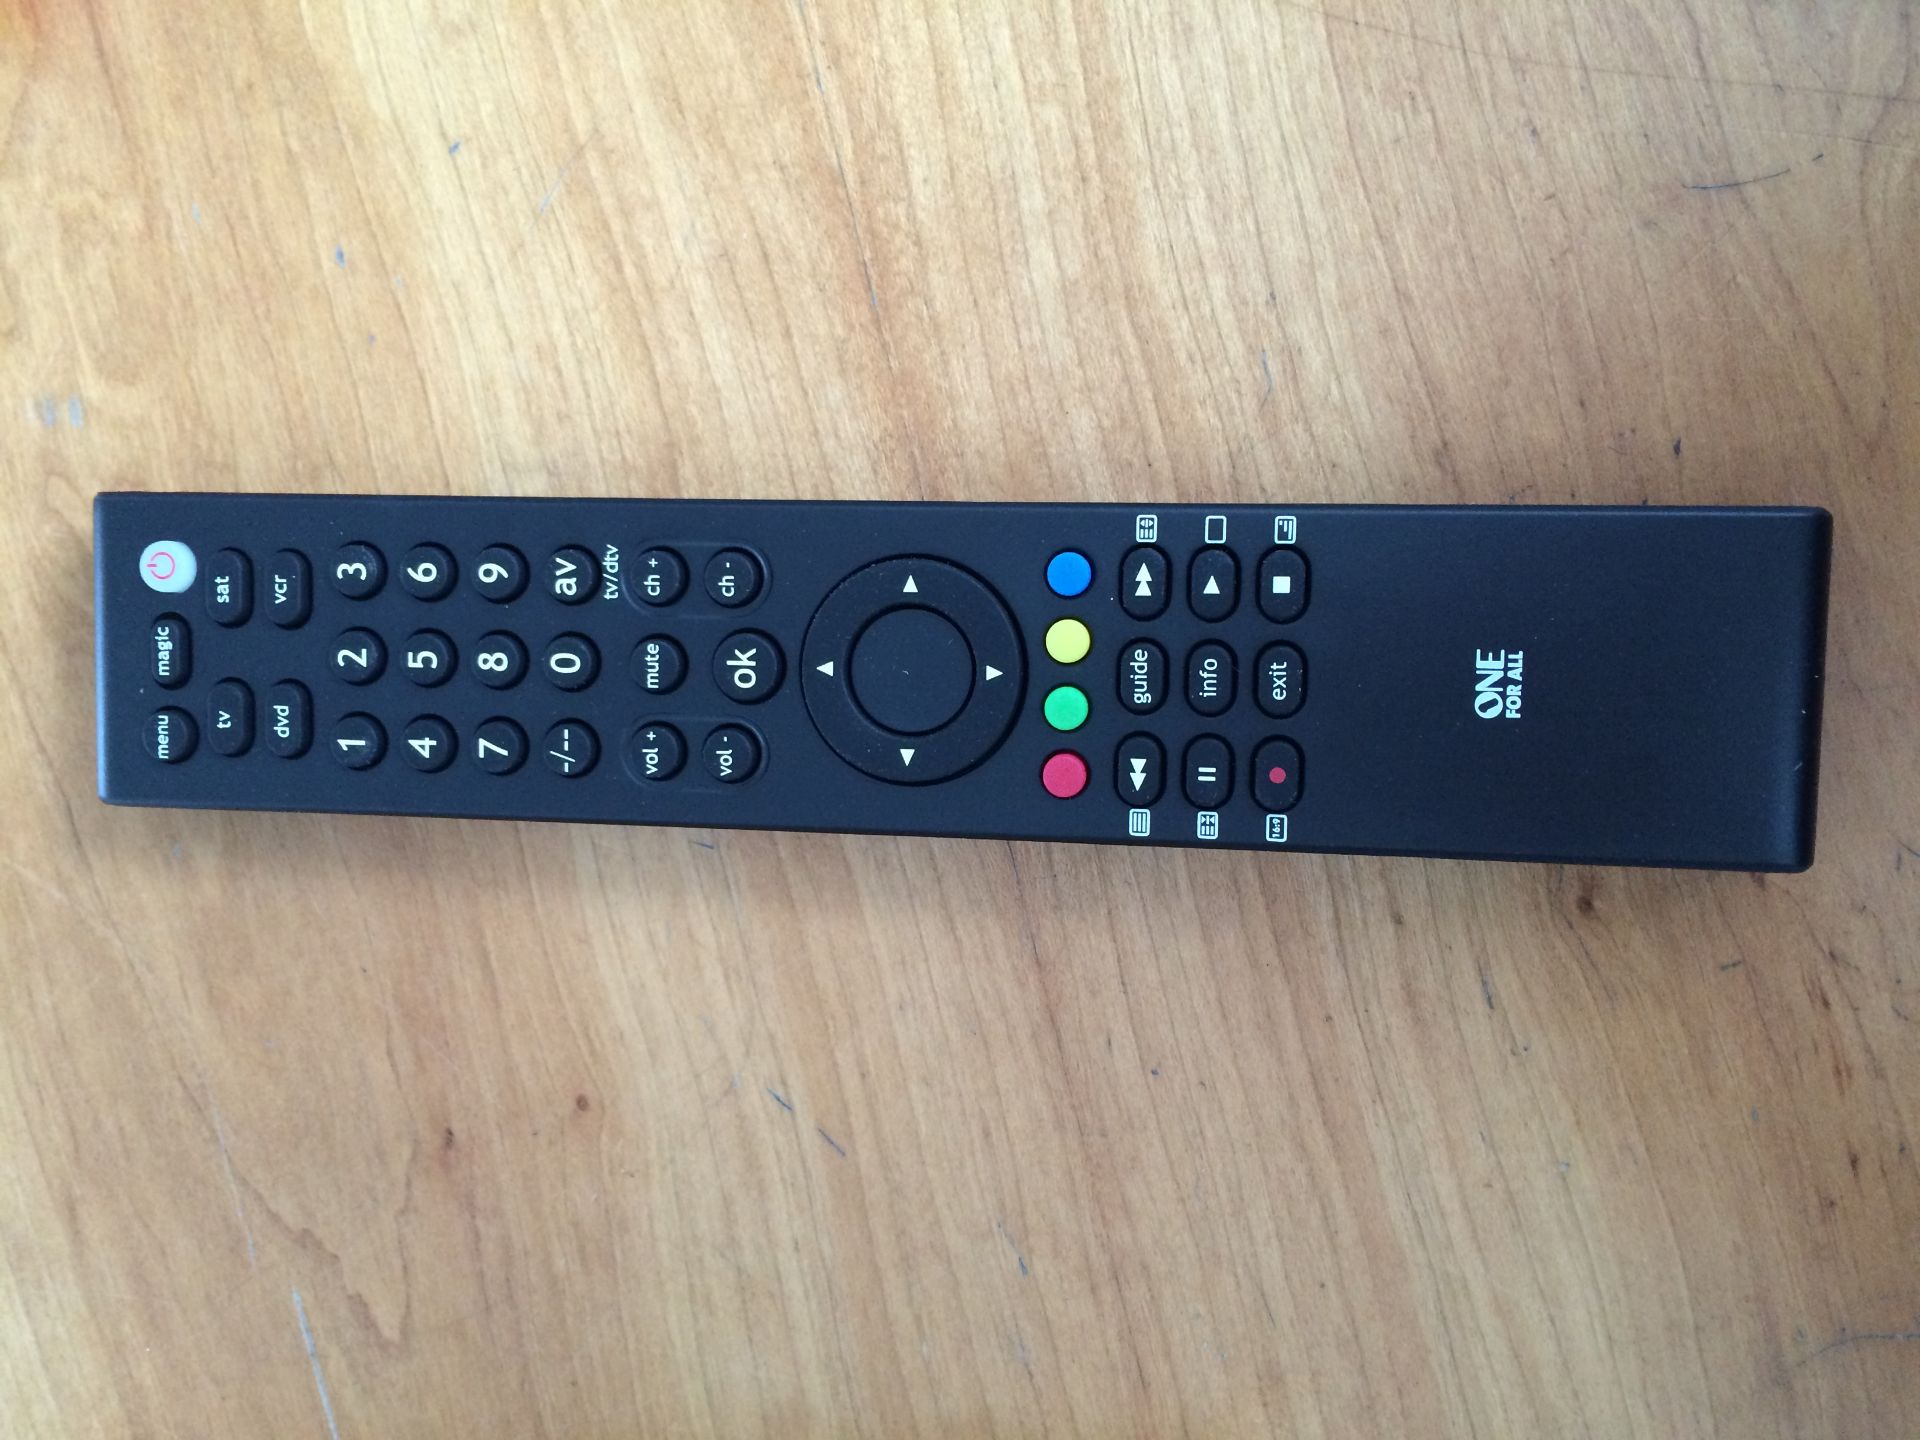 V Brand New Remote Control suitable for TV/DVD/VCR/ SAT. Cable/ 2xAA Battery Included - NOTE: Item